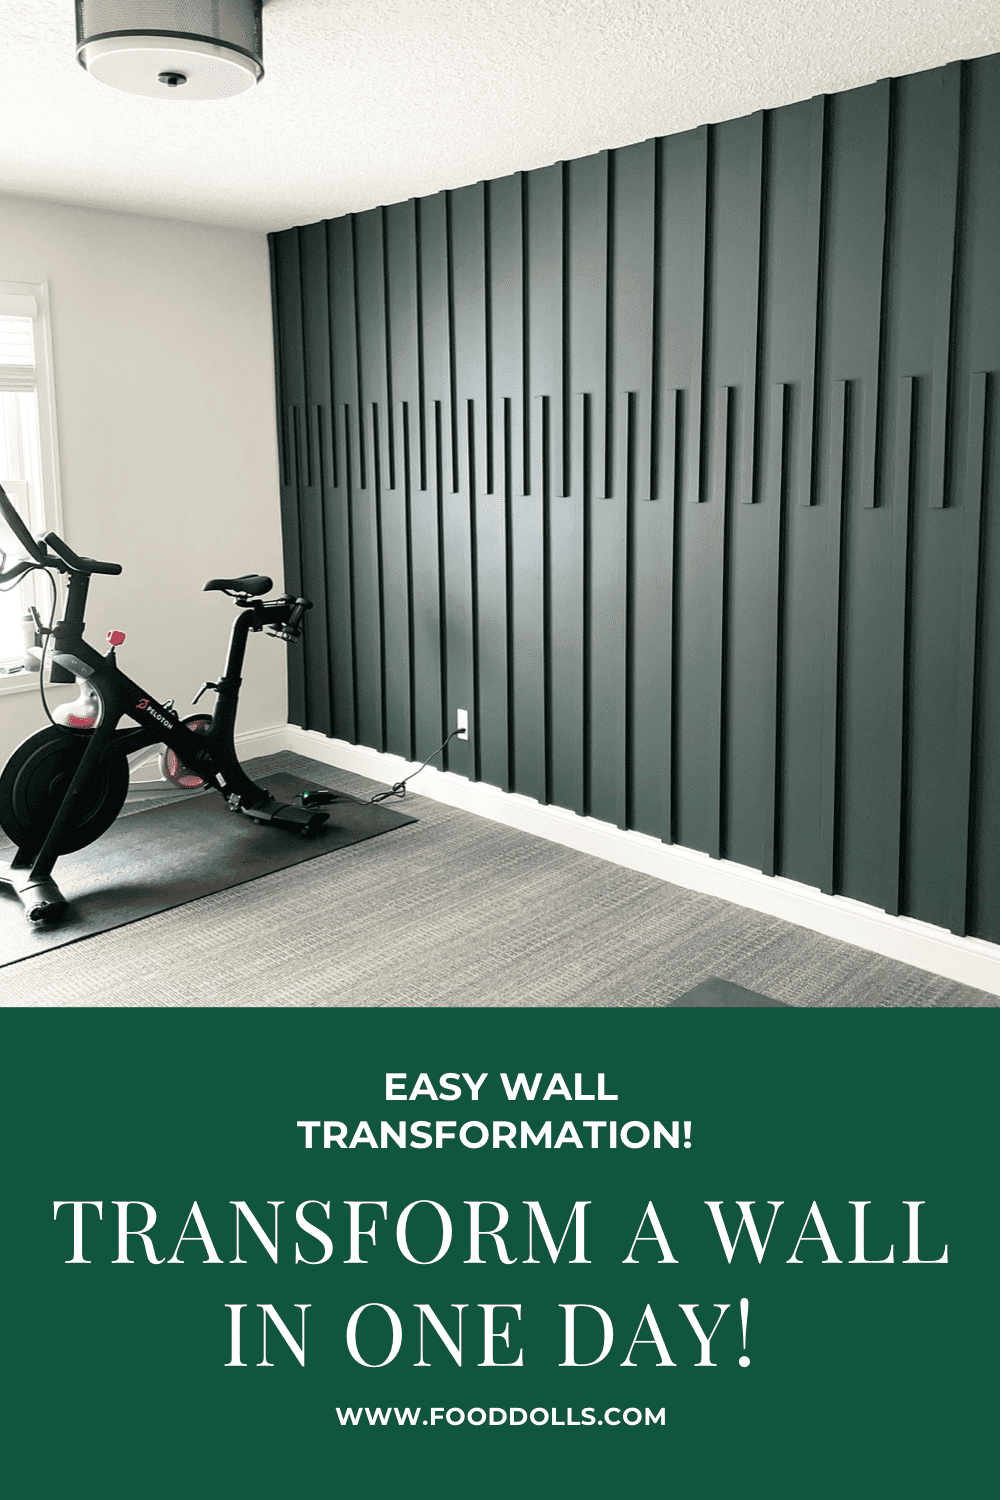 Easy wall transformation pinterest image